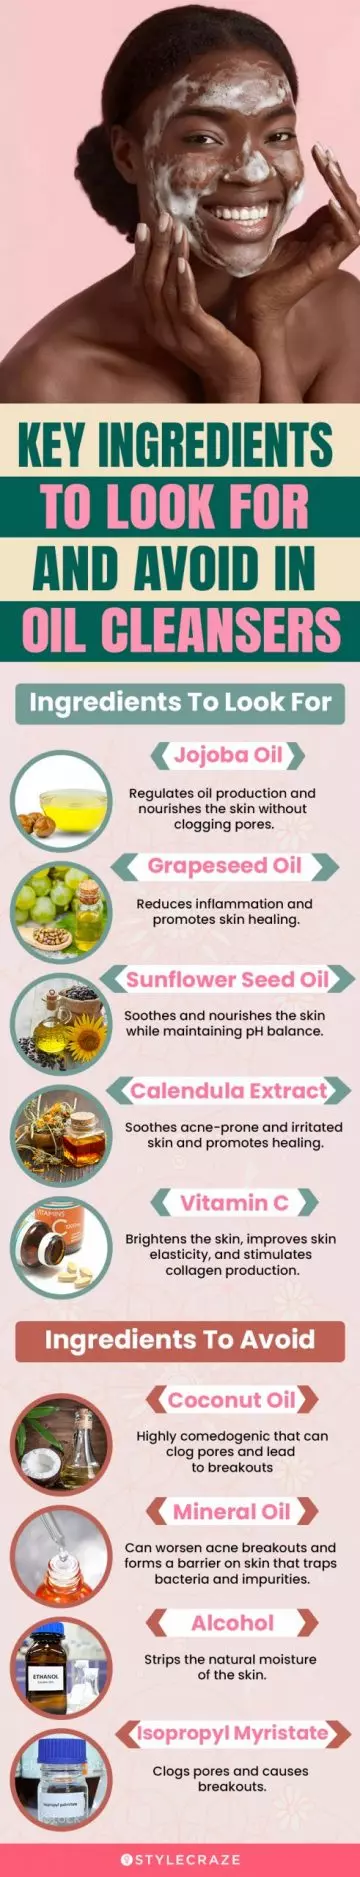 Key Ingredients To Look For And Avoid In Oil Cleansers (infographic)